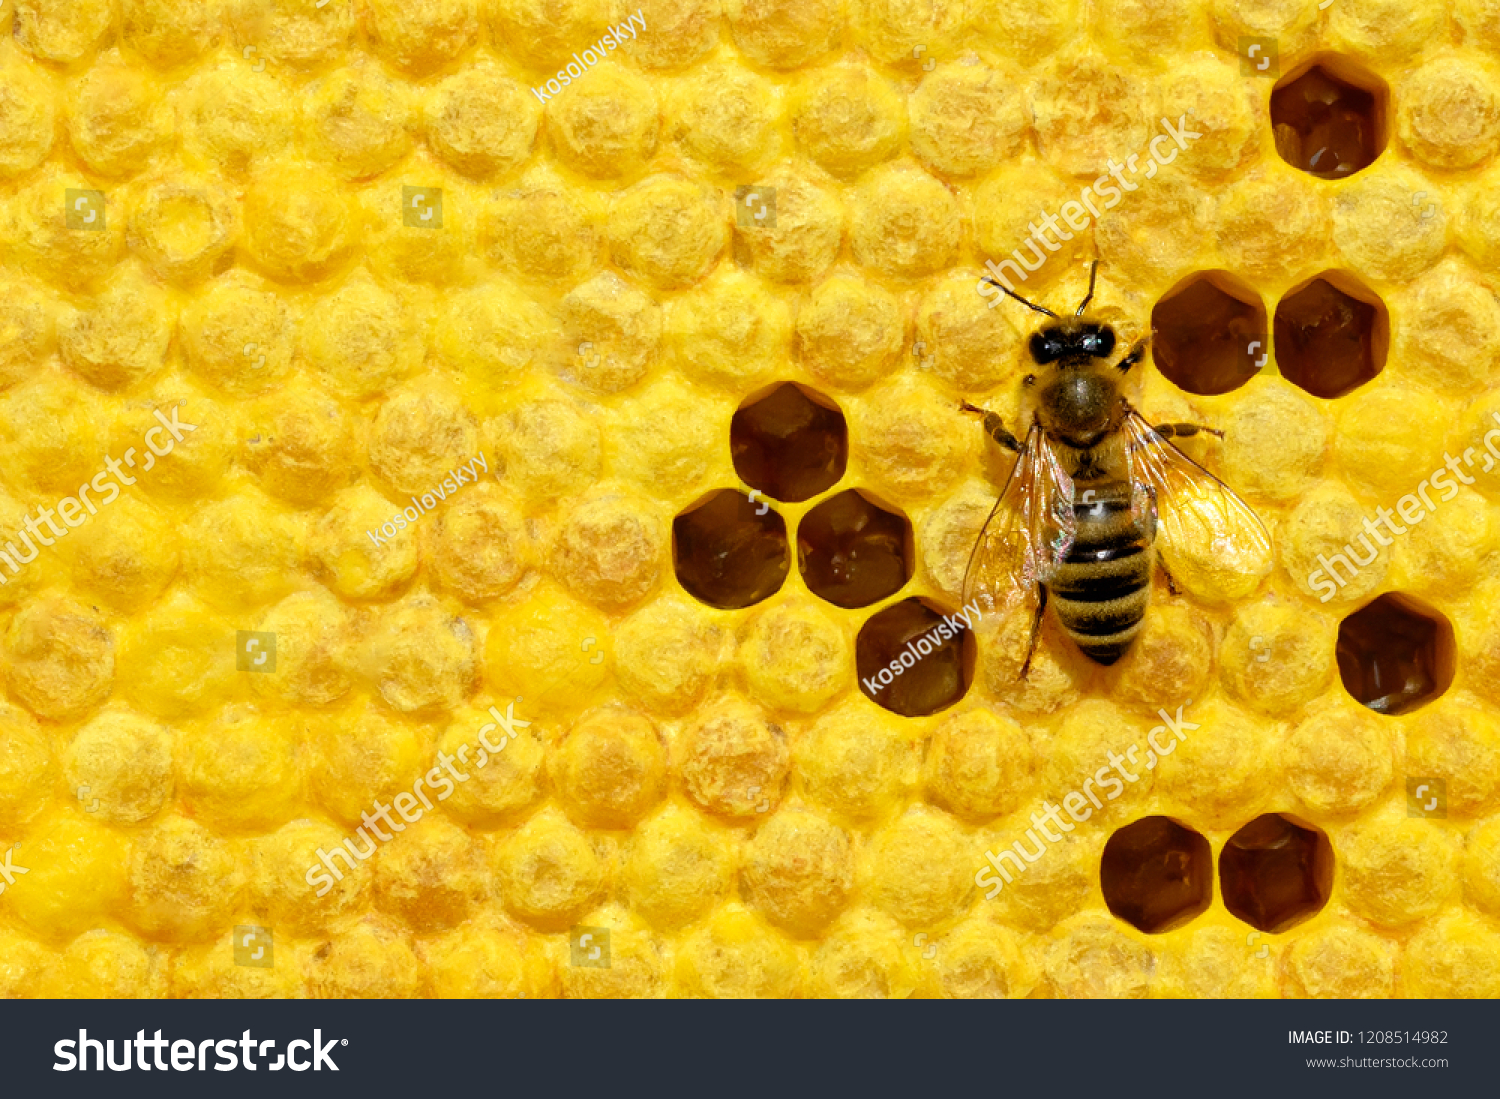 Macro photo of honey bee on a honeycomb with bee larvae. Reproduction of bees. Bees Broods. #1208514982